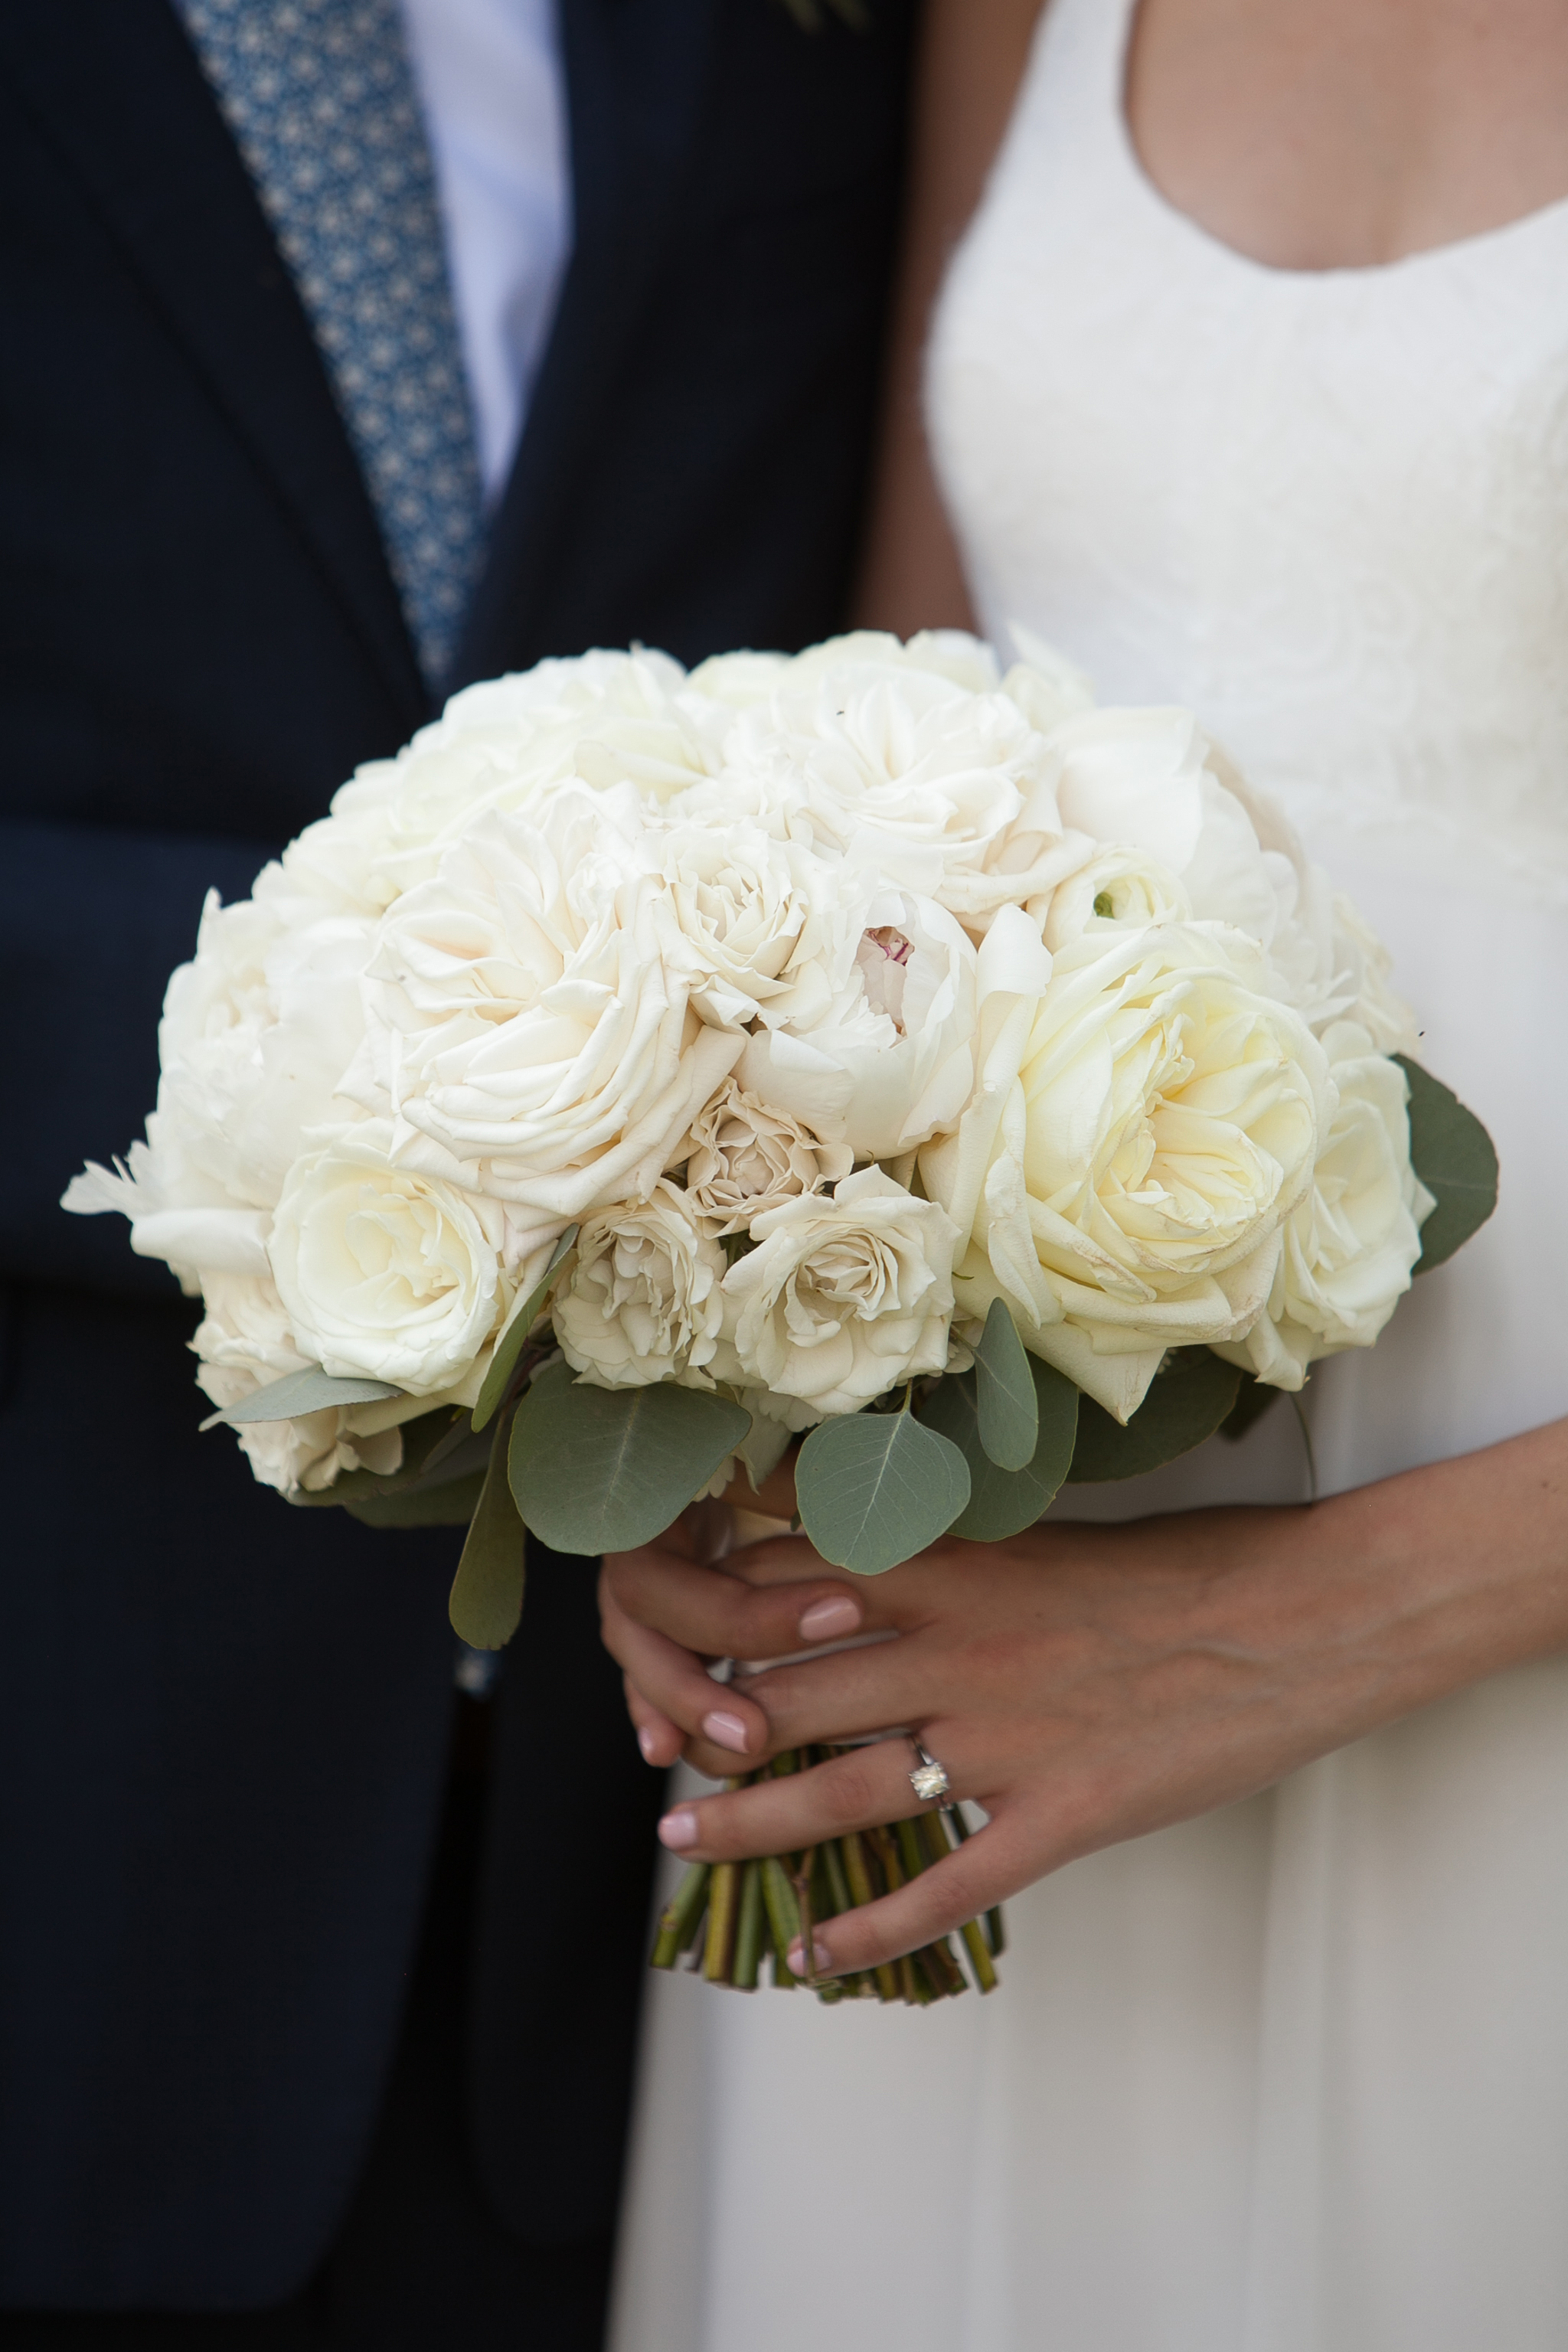  Atelier Ashley Flowers + Dusty Blue + Borrowed and Blue Photography + Congressional Country Club + DC wedding + all white wedding bouquet + white peonies 